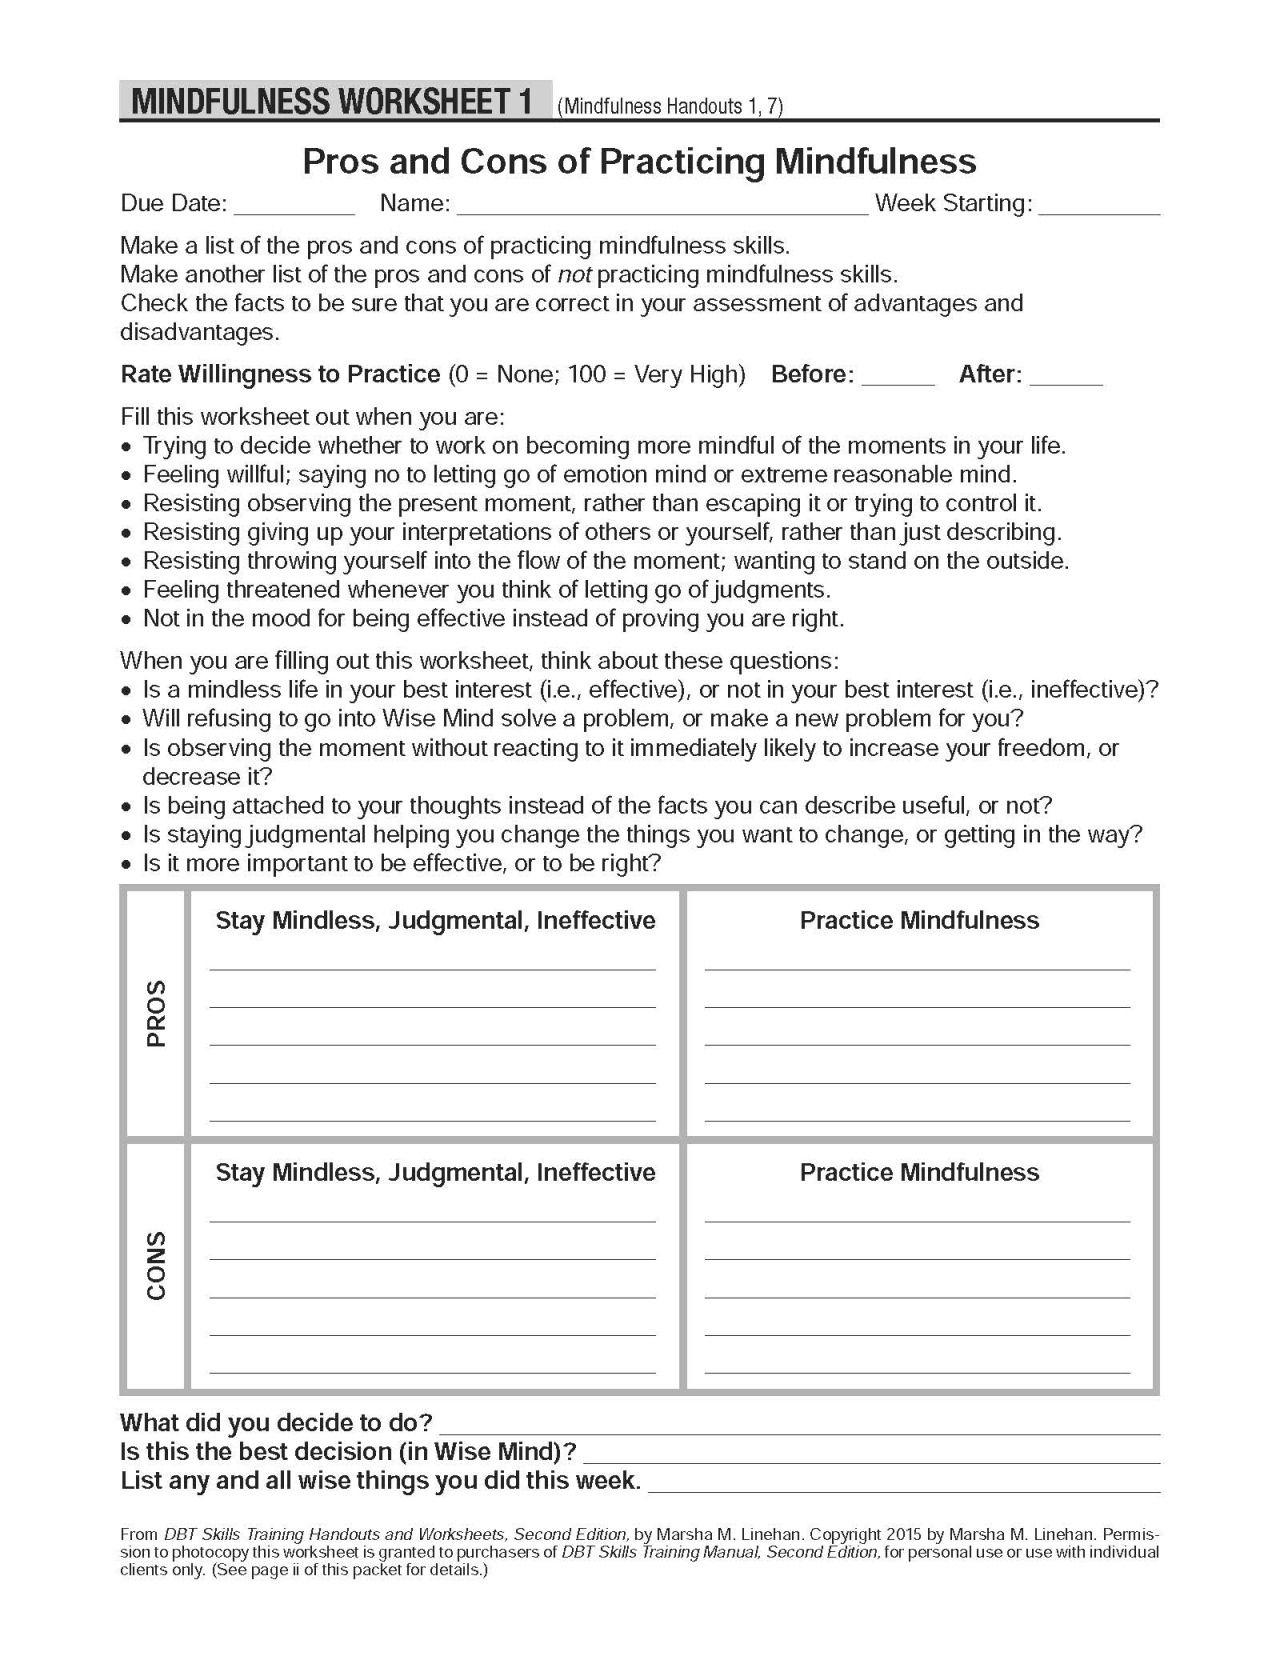 Pros And Cons DBT Worksheet